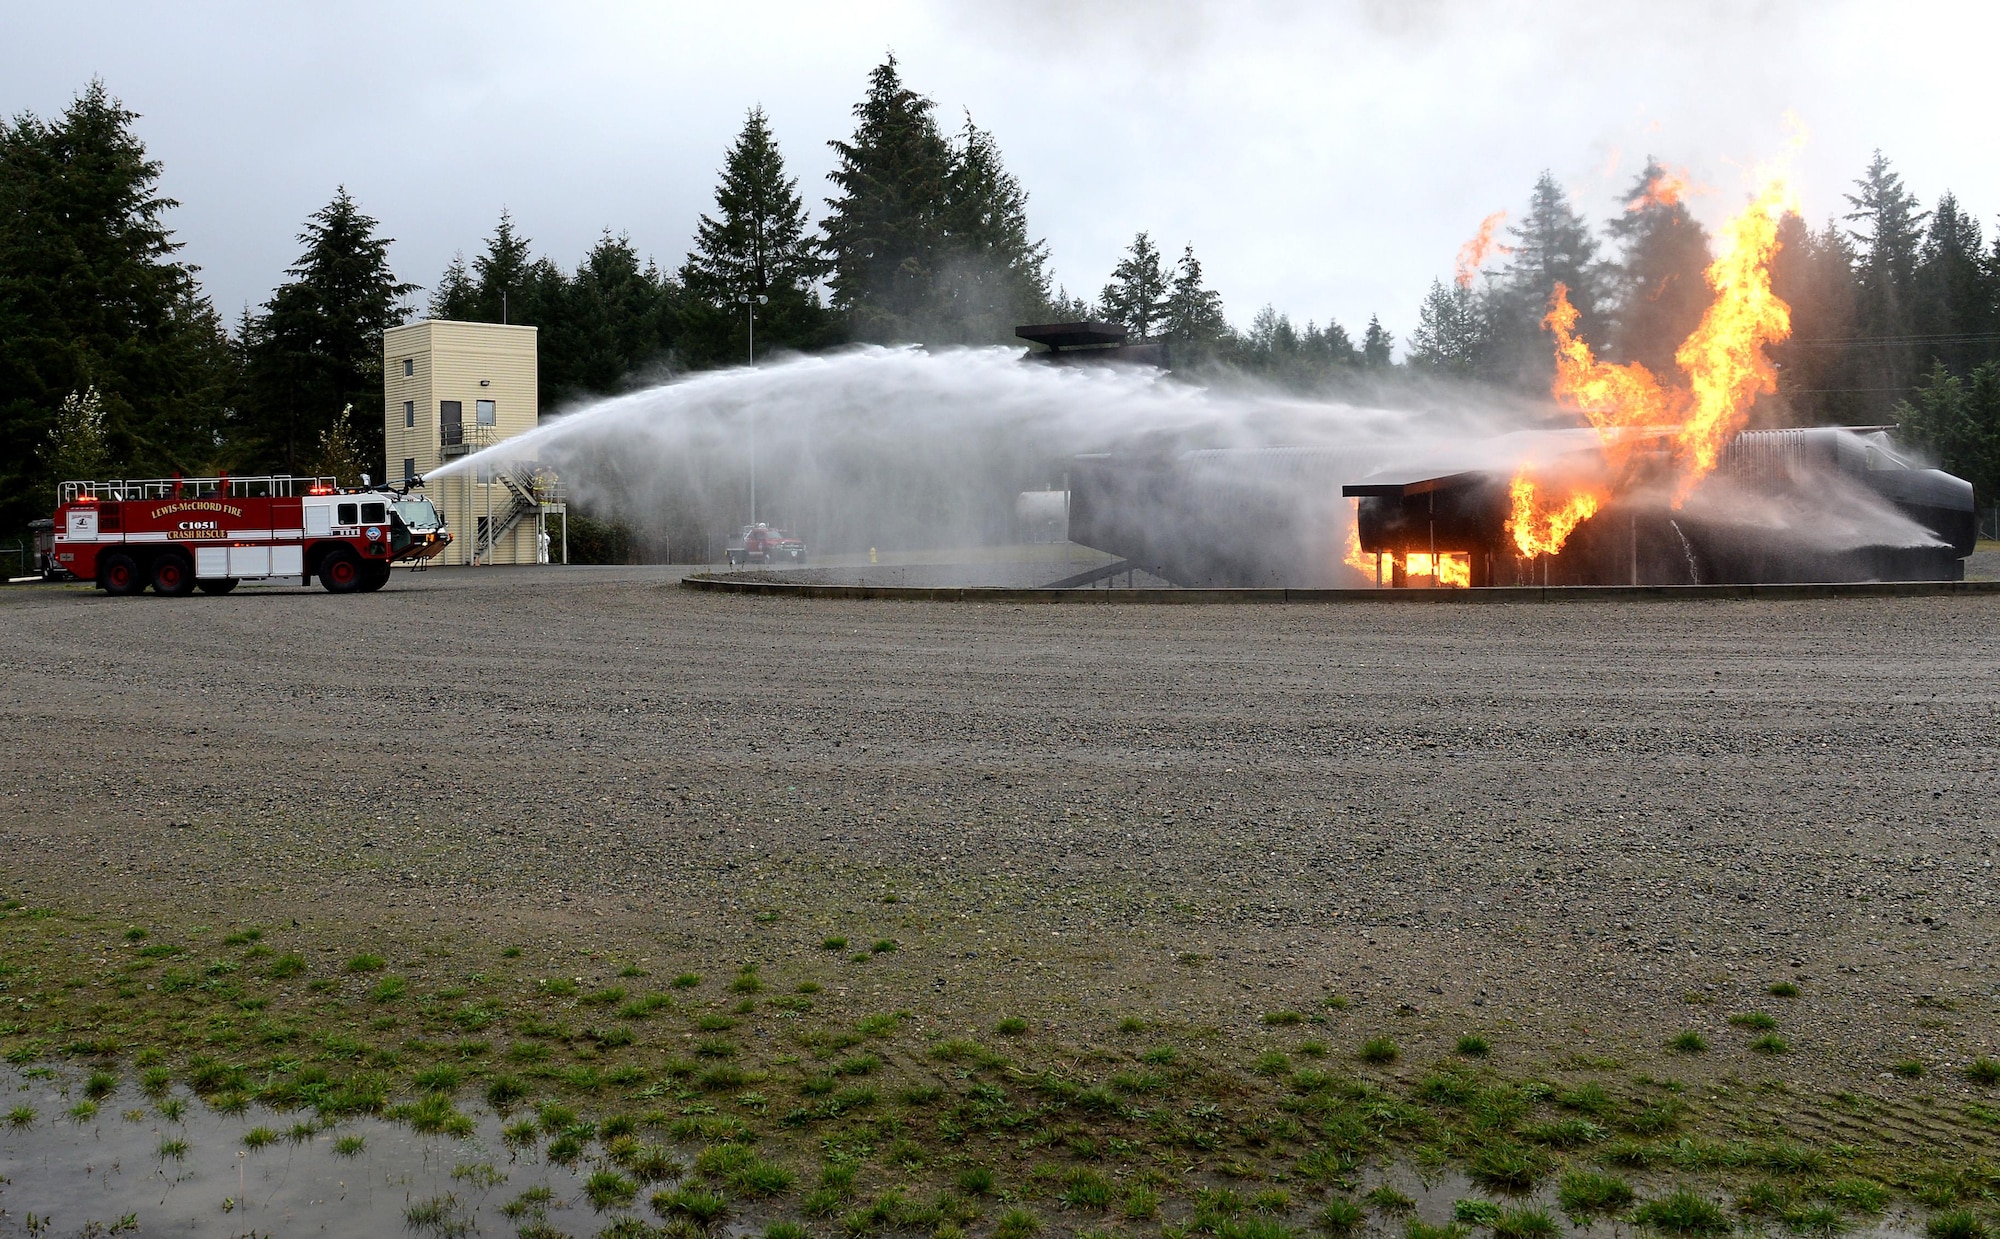 A McChord fire truck puts out a simulated aircraft fire during Ben Lambertson’s Pilot for a Day visit Oct. 7, 2016 at Joint Base Lewis-McChord, Wash. Ben was selected by the McChord Air Force Association as this month’s Pilot for a Day. (U.S. Air Force photo/Senior Airman Divine Cox)